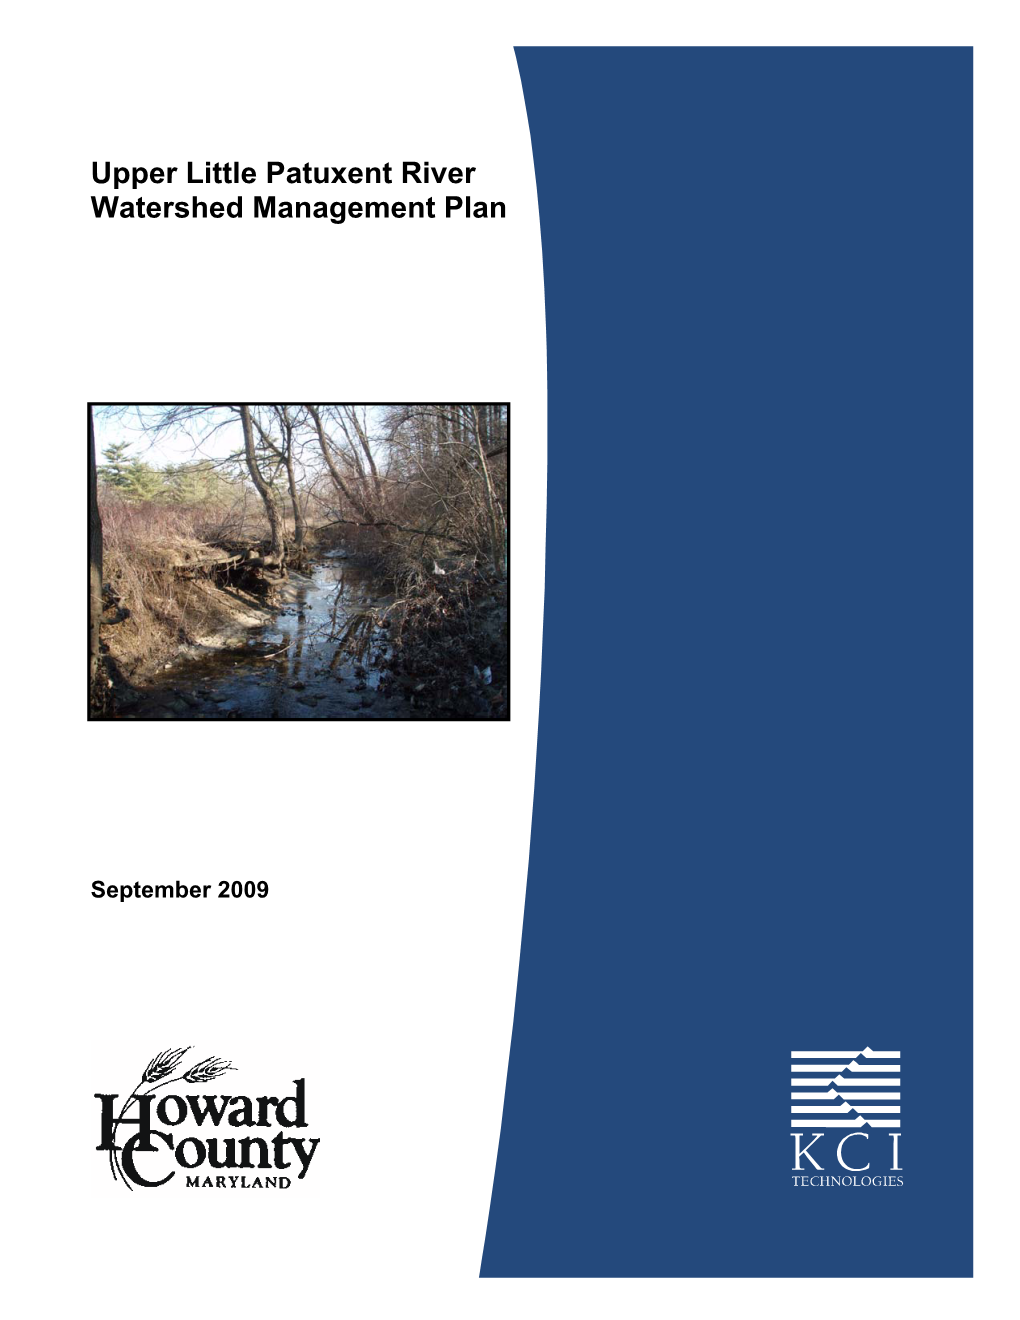 Upper Little Patuxent River Watershed Management Plan